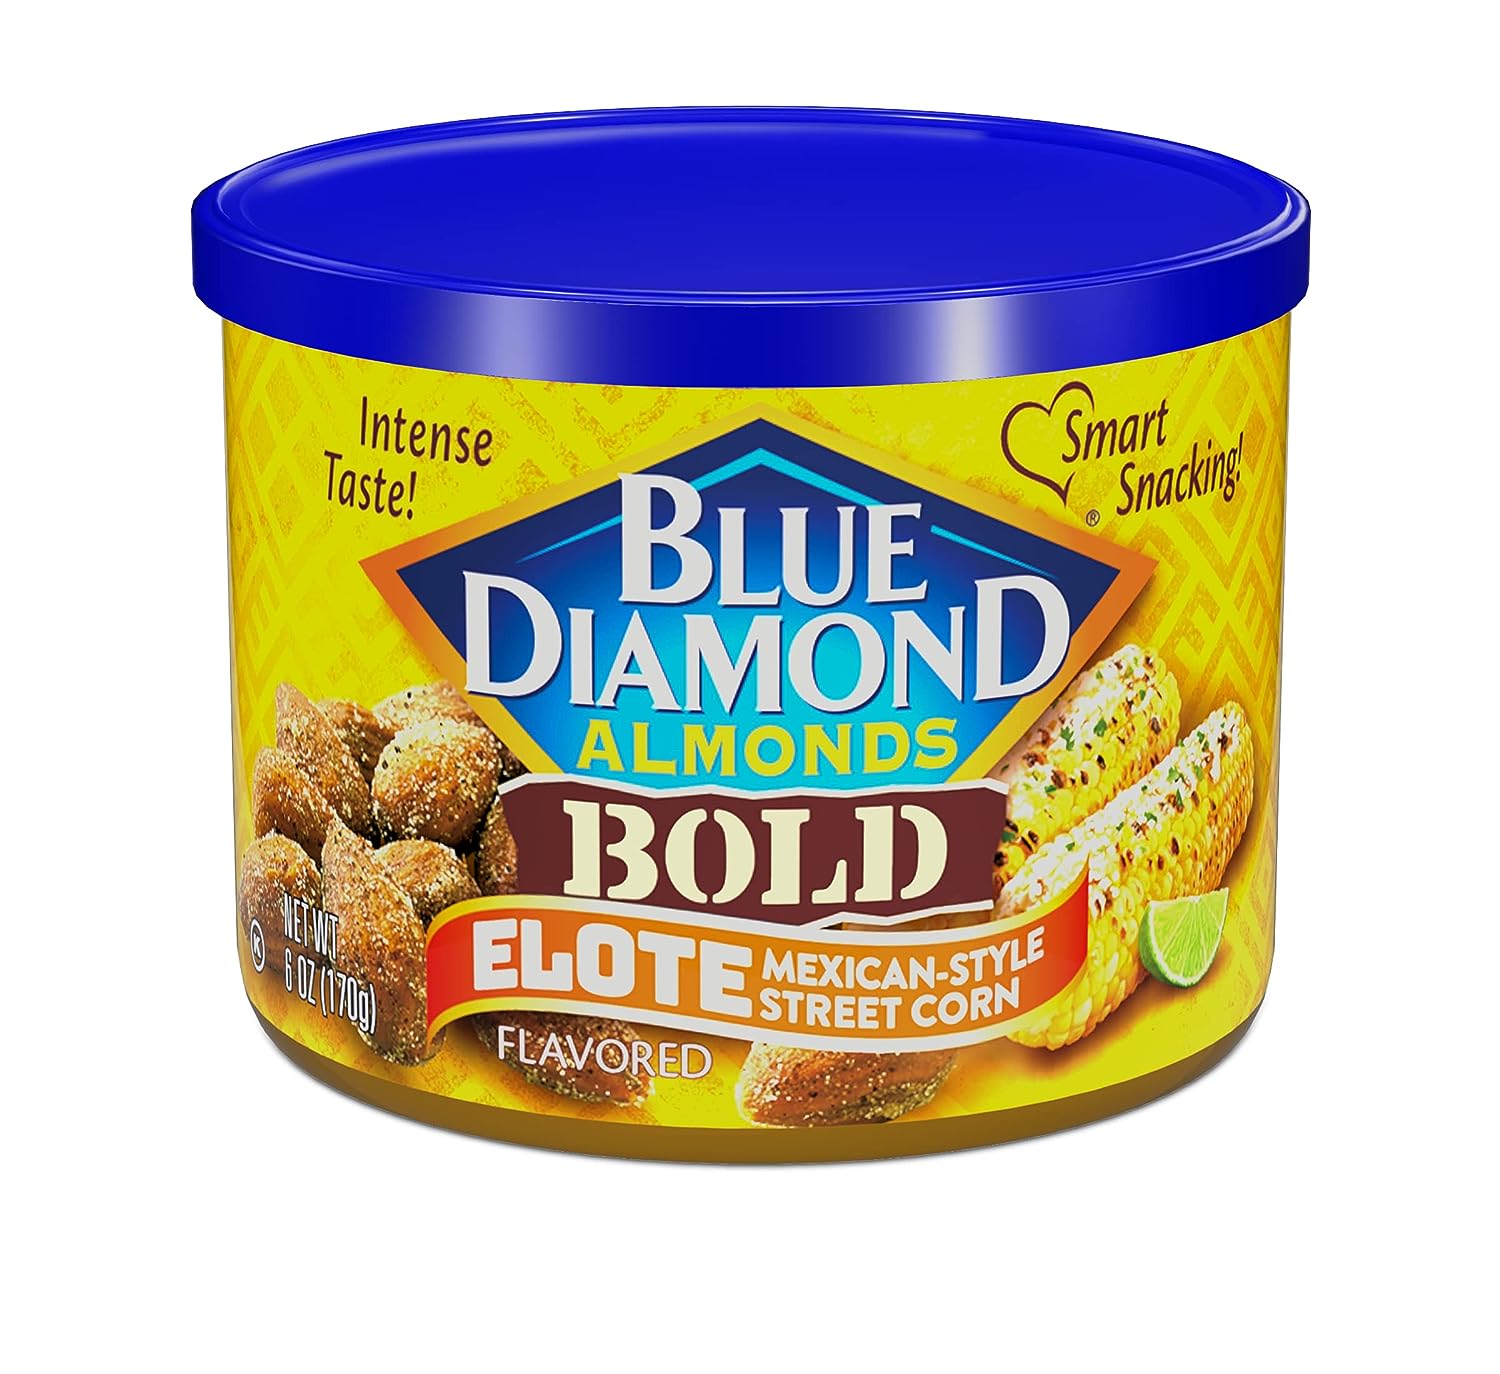 6-Ounce Blue Diamond BOLD Almonds (Elote Mexican Street Corn) $2.83 w/ S&S + Free Shipping w/ Prime or $35+